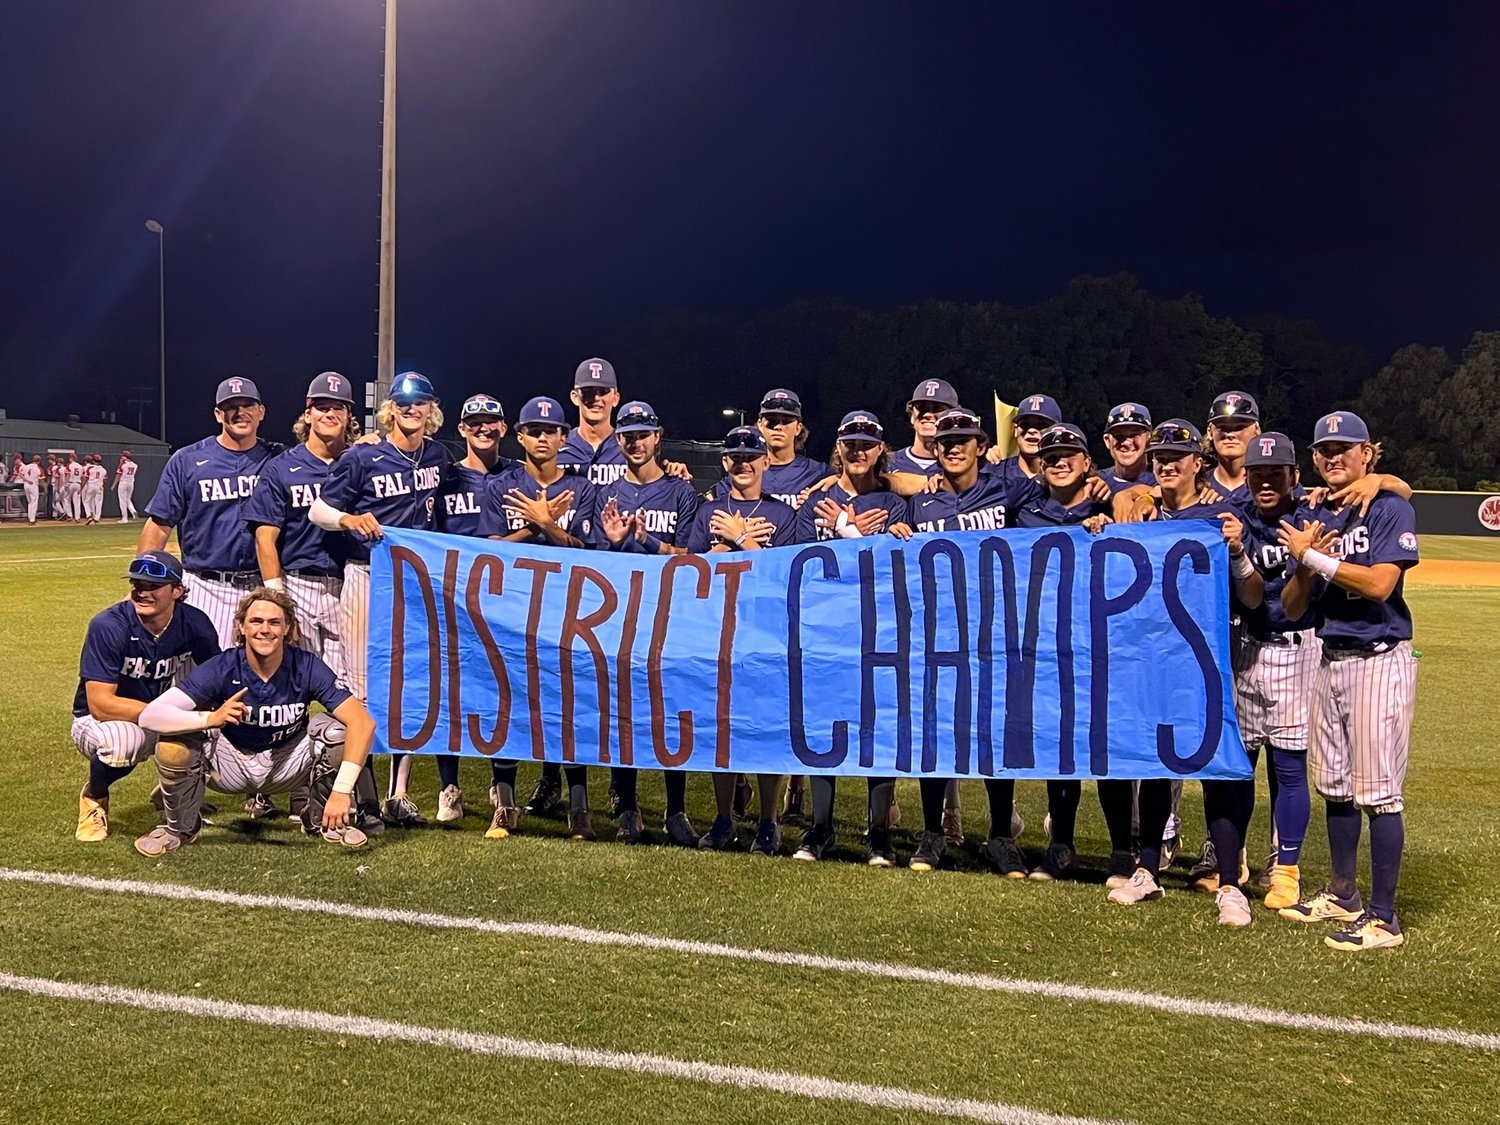 Tompkins claimed the District 19-6A title on Friday with a win over Katy.